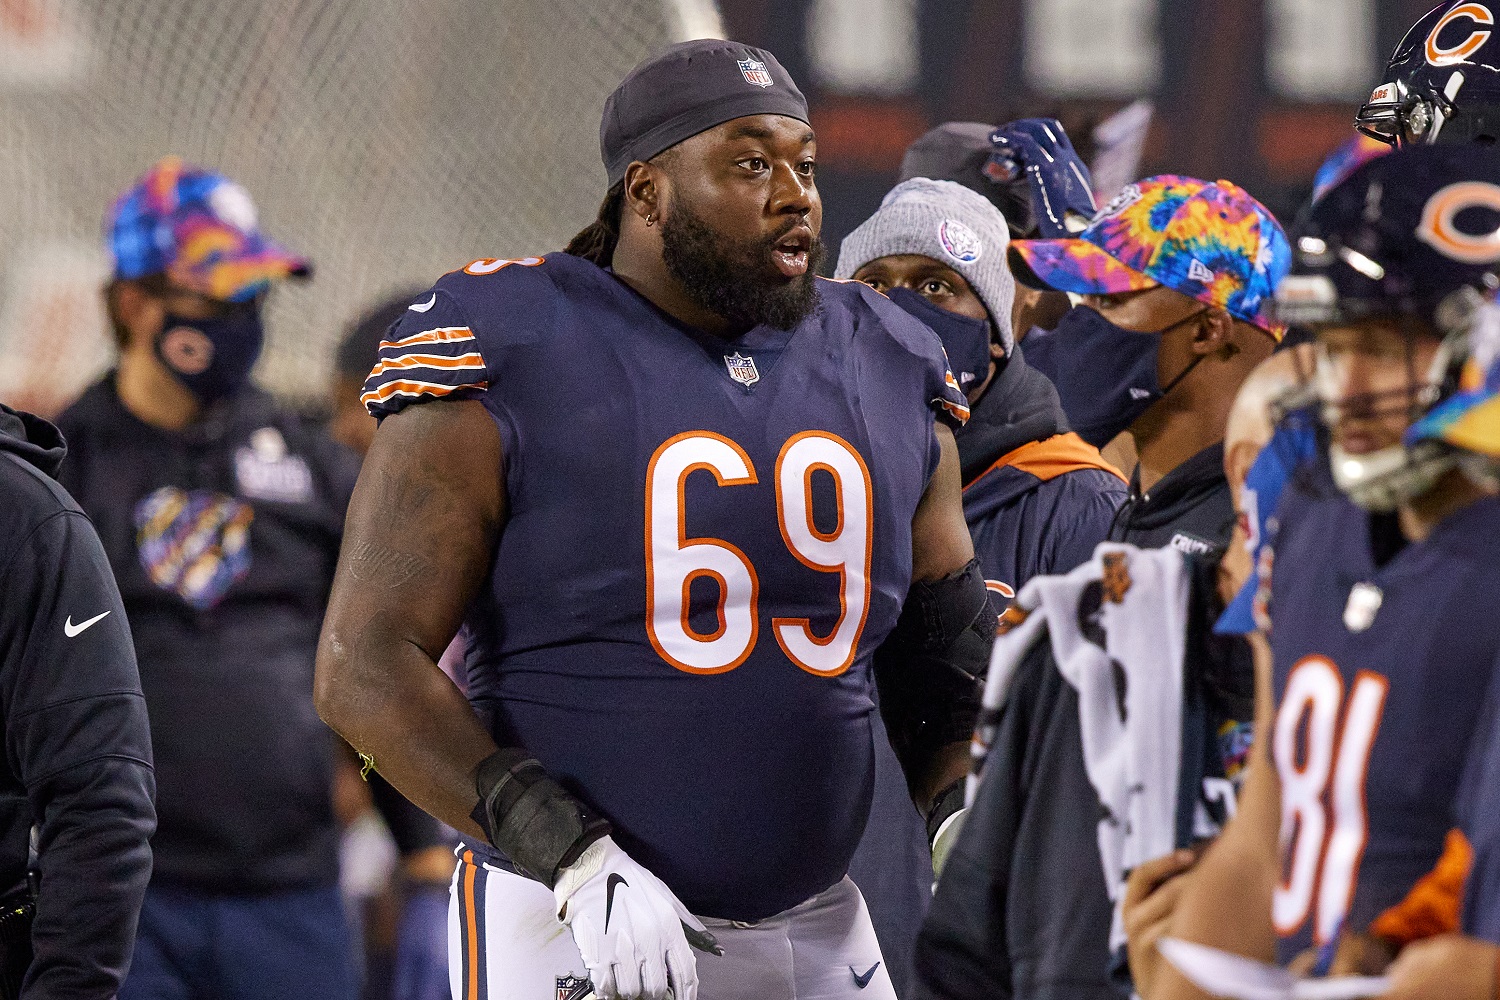 Rashaad Coward converted from the defensive line at Old Dominion to offensive line for the Chicago Bears and recently signed with the Pittsburgh Steelers. | Robin Alam/Icon Sportswire via Getty Images